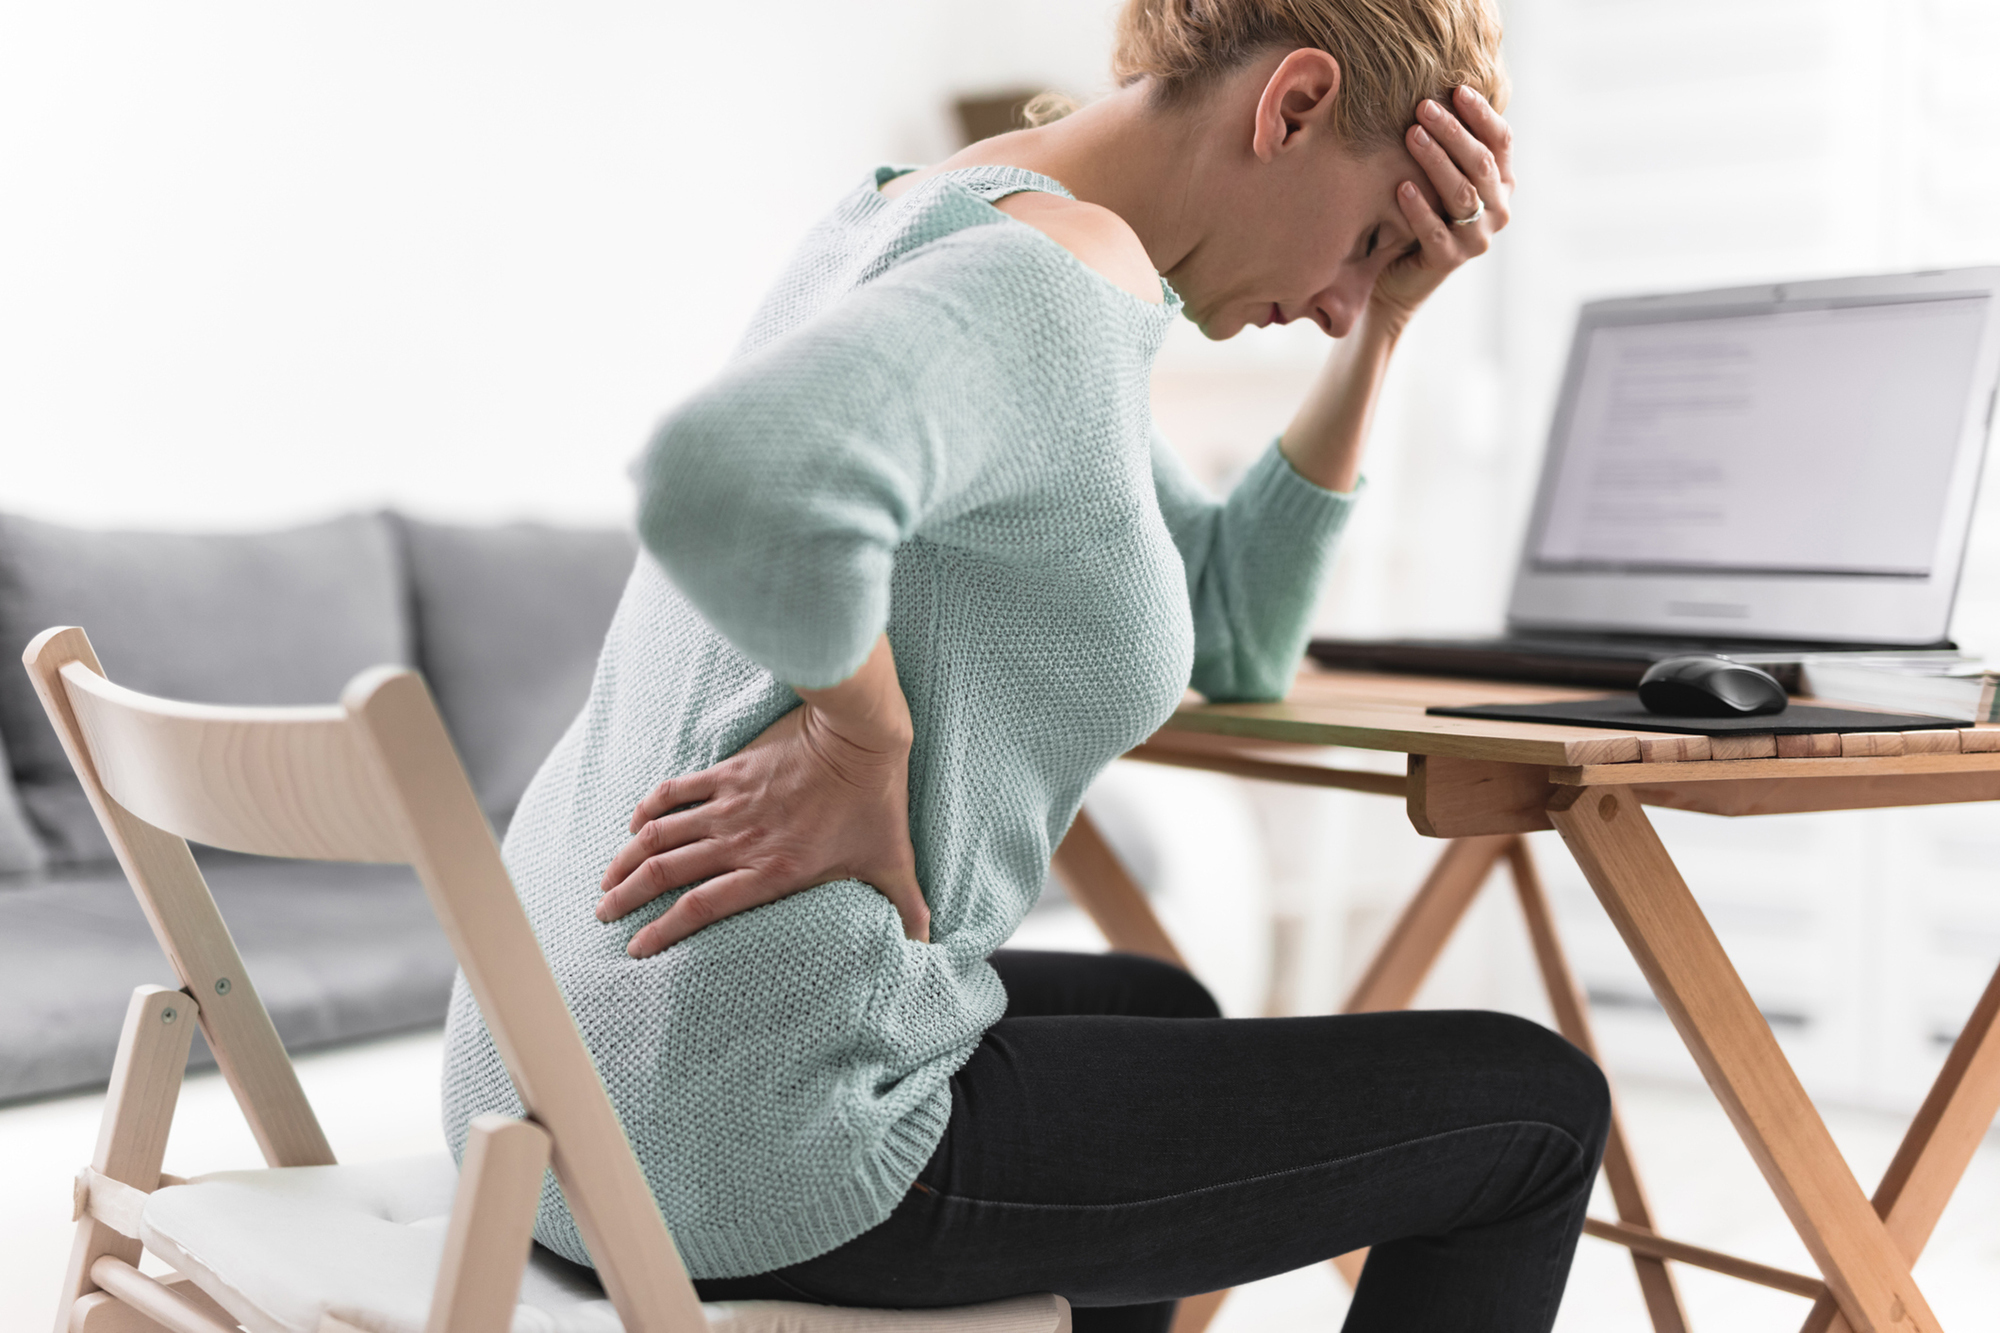 Person with back pain reaching for their back in a chair